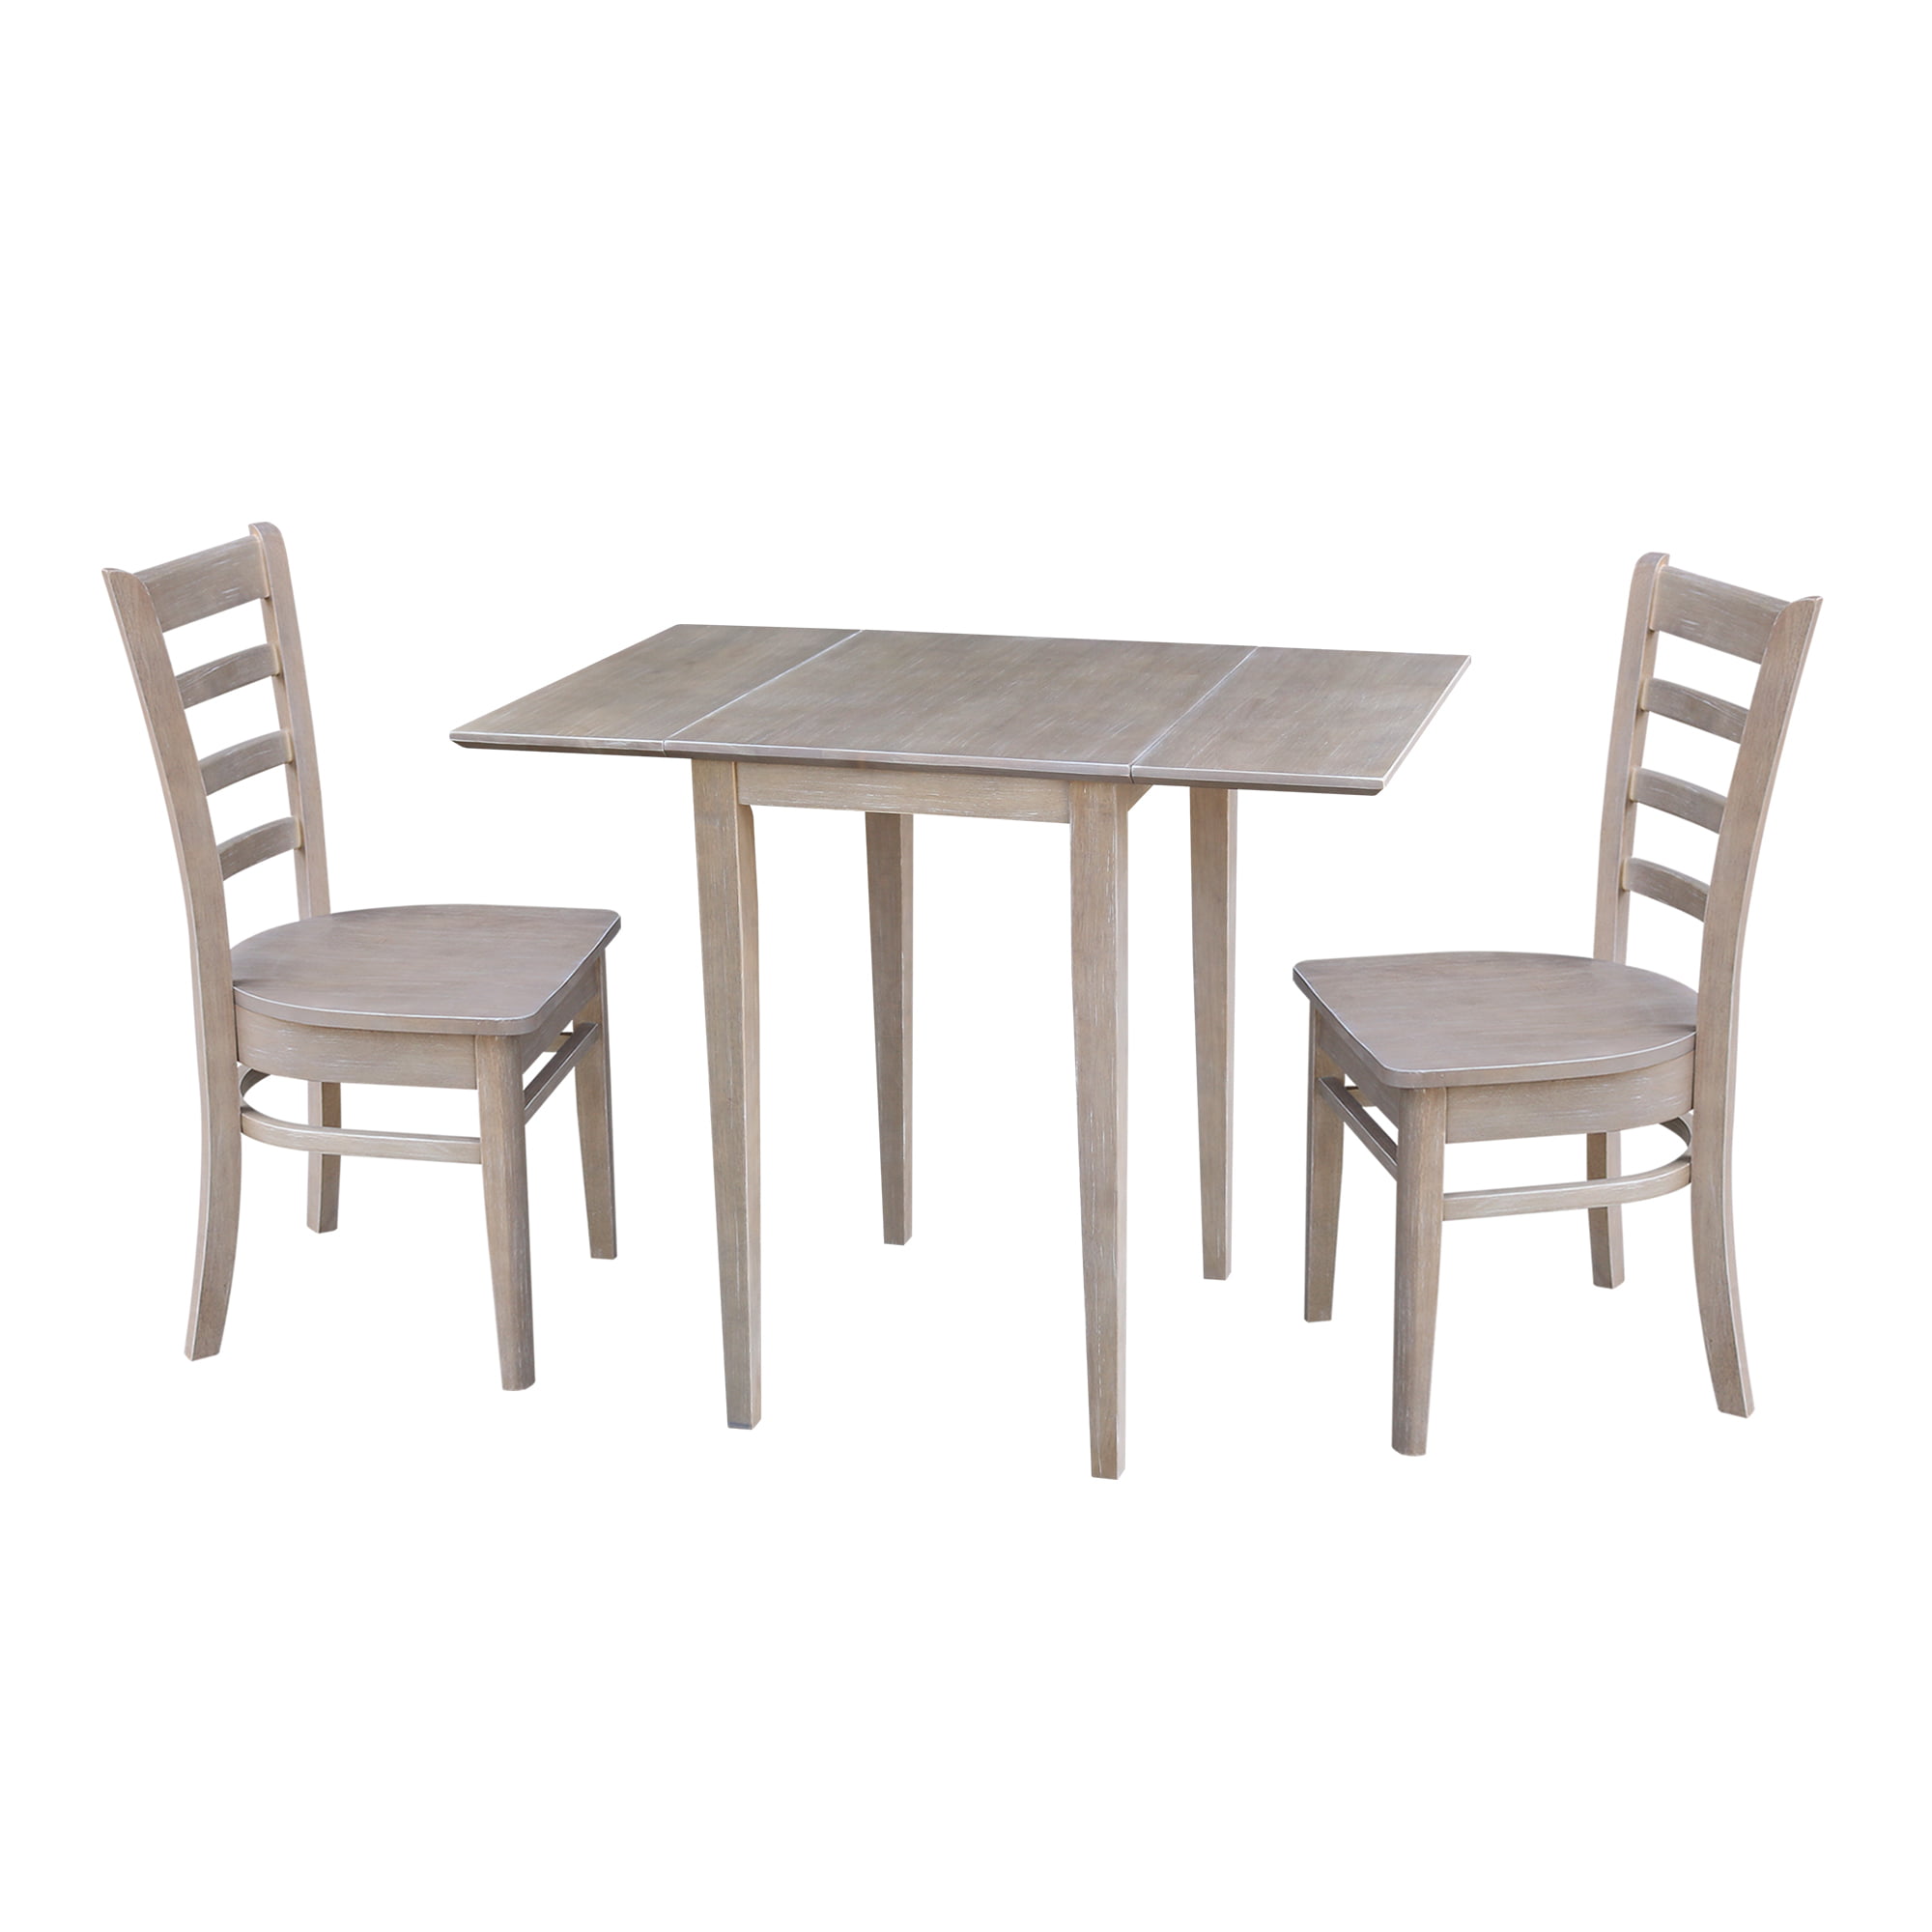 Small Dining Table Two Chairs : Top 20 Two Chair Dining Tables ...